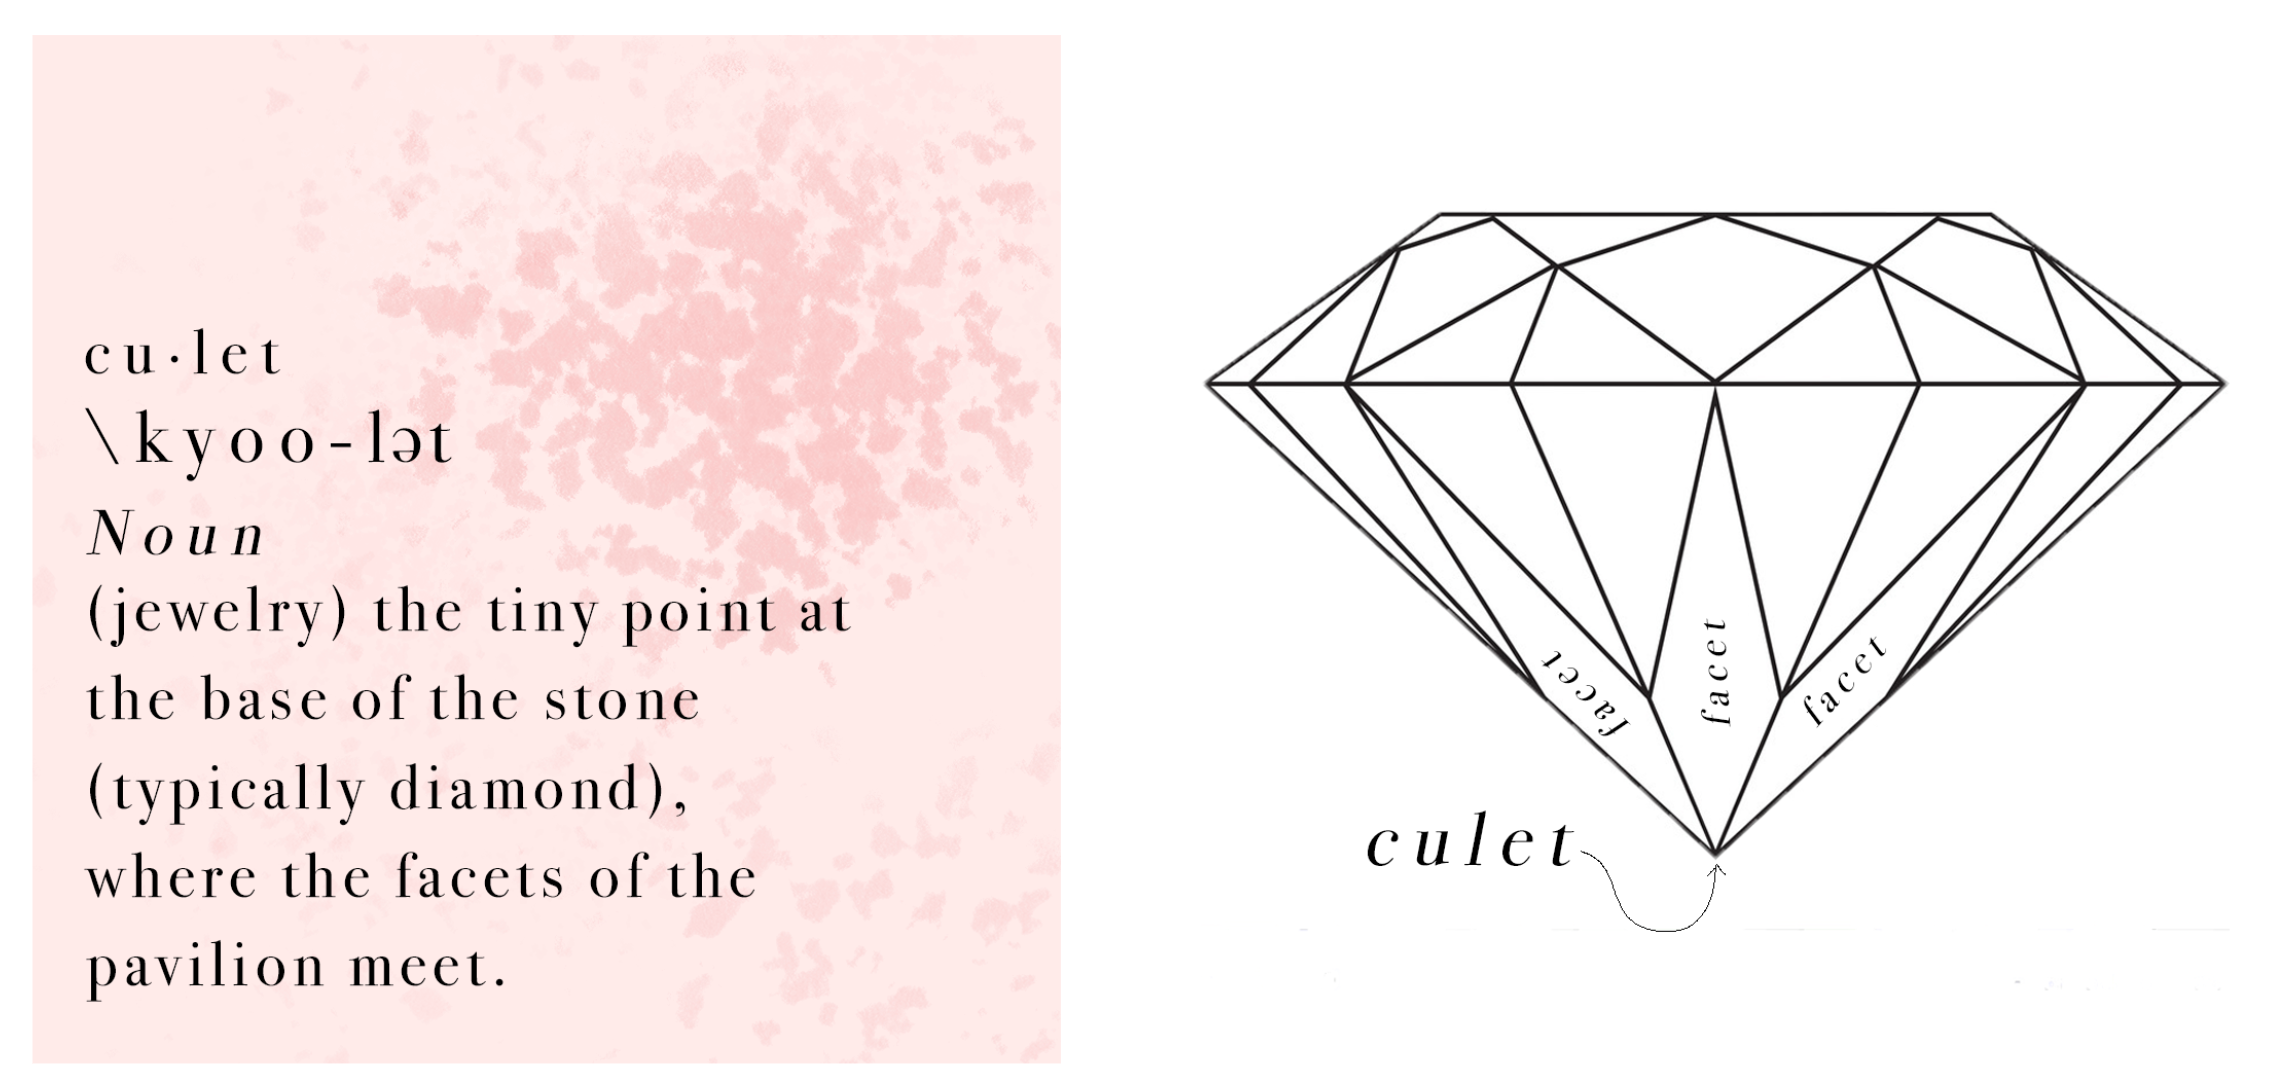 culet definition and diamond diagram